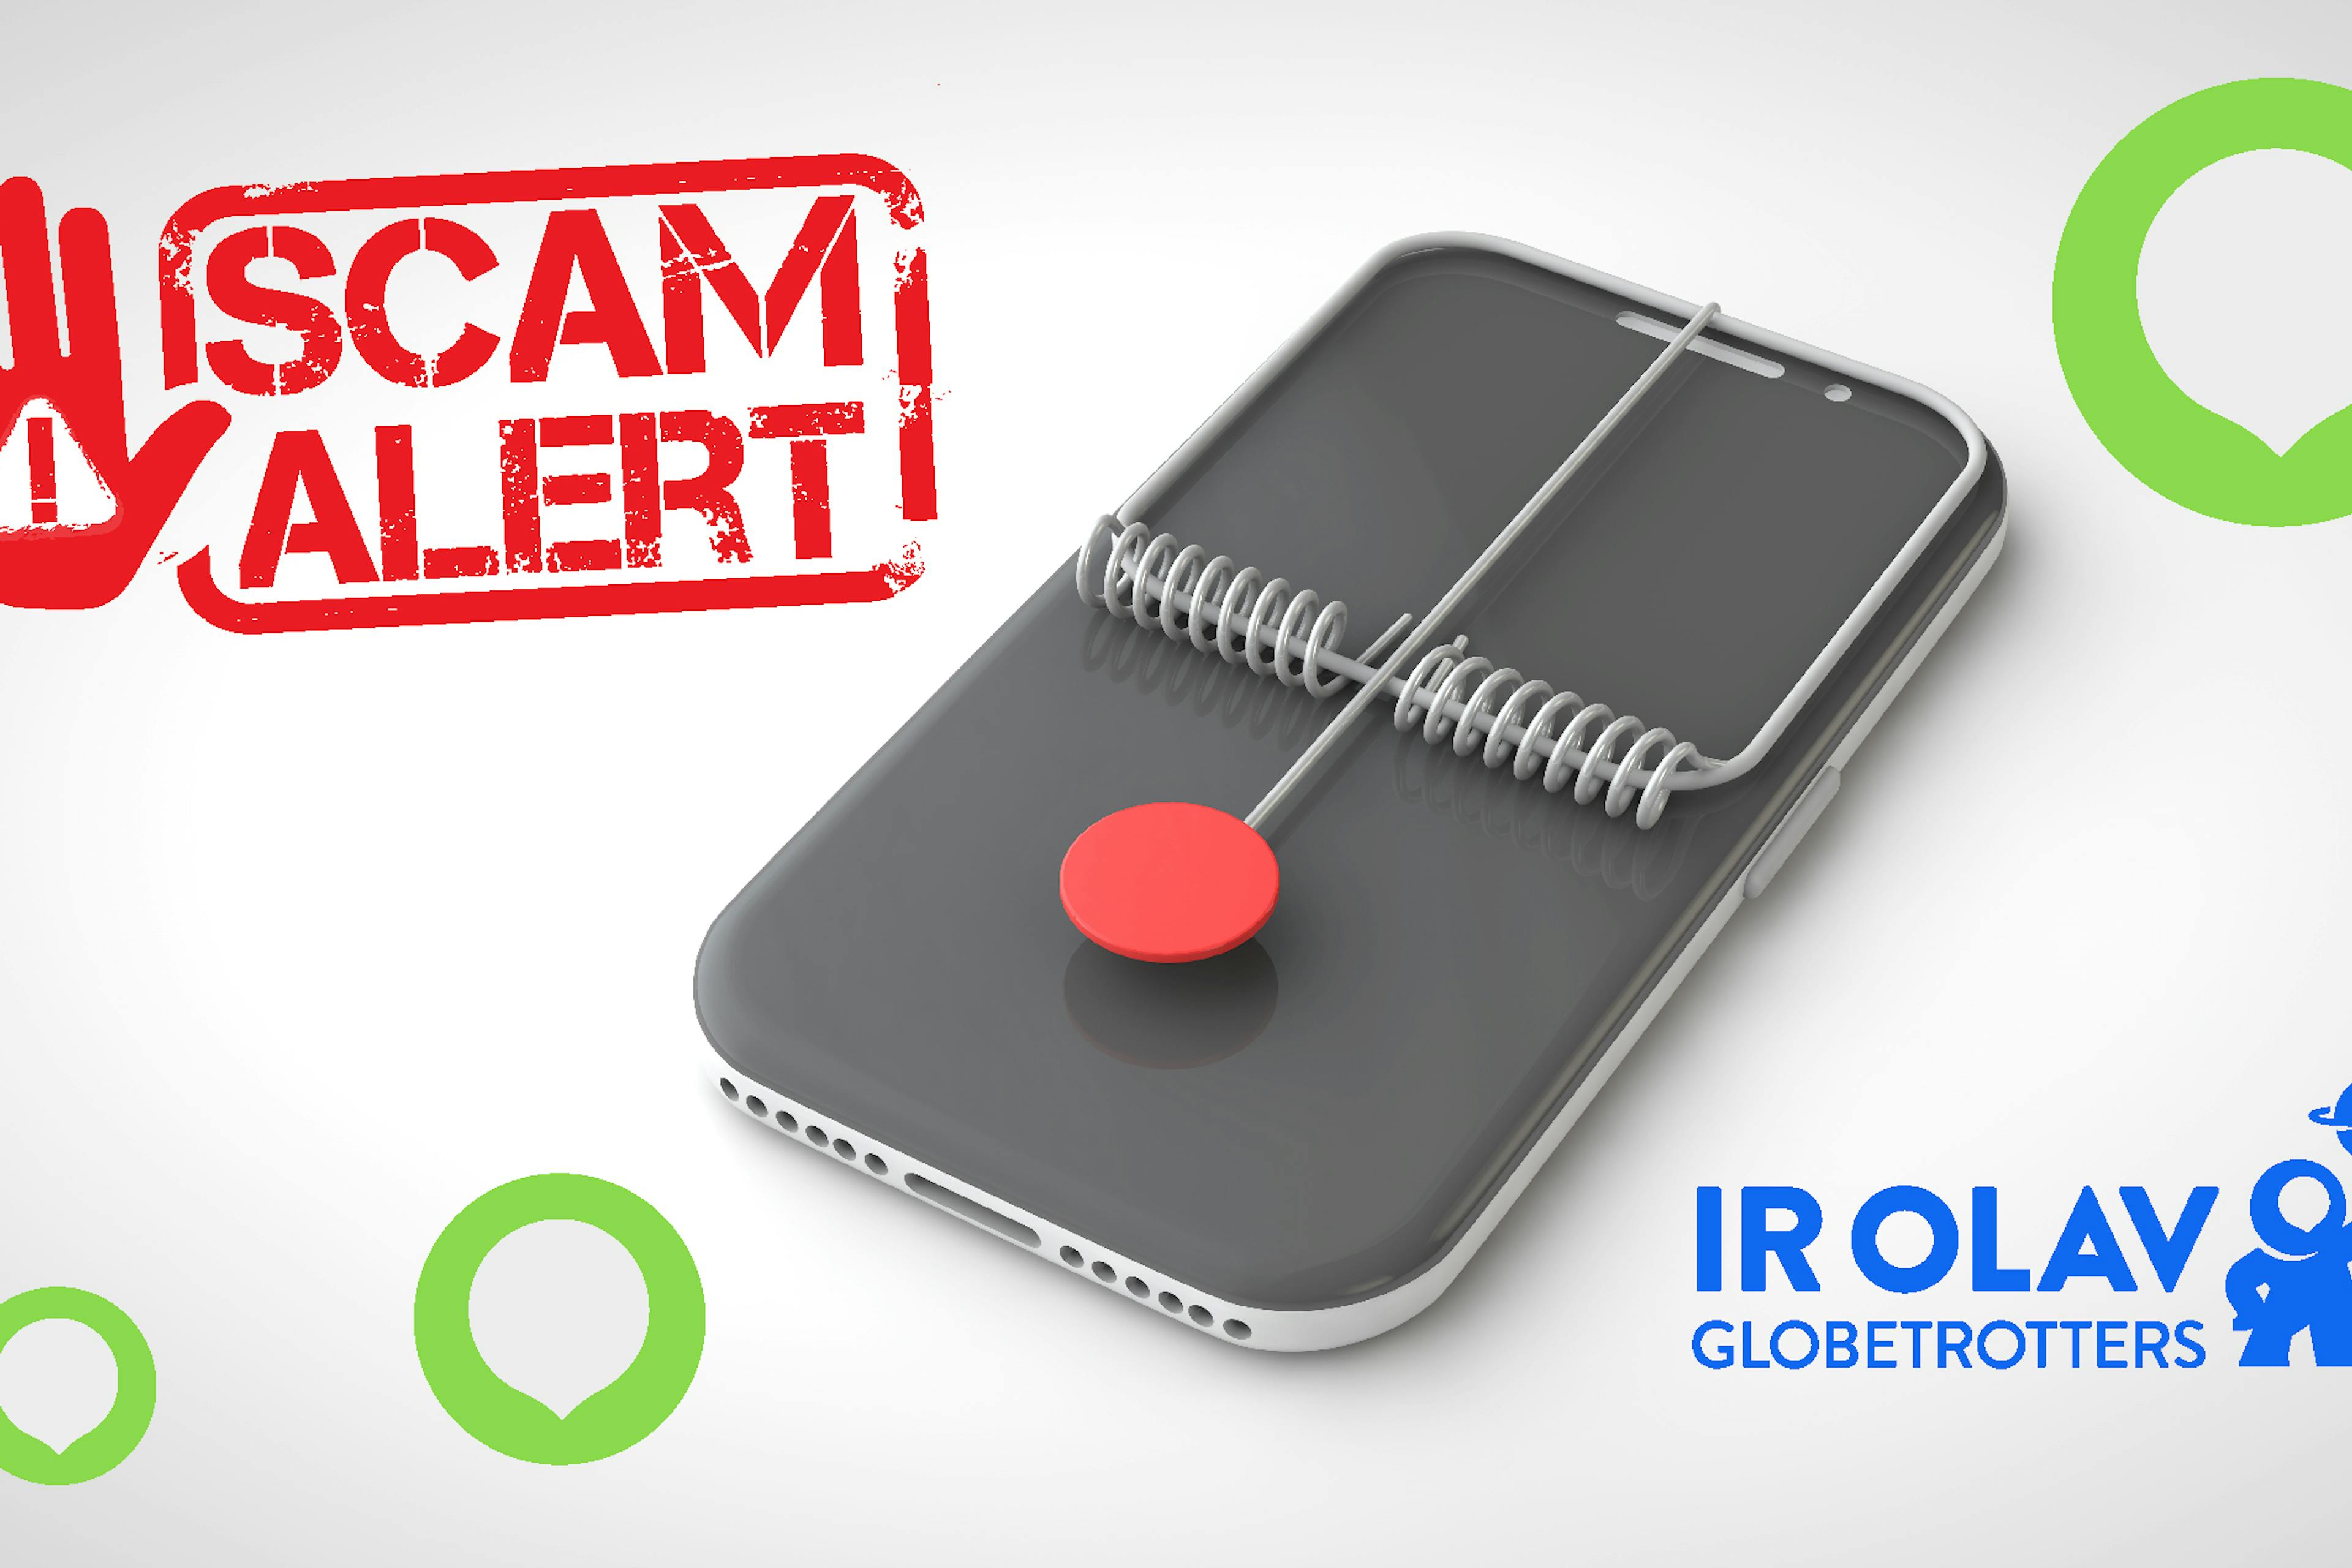 Beware of Scammers pretending to be Ir Olav’s Globetrotters